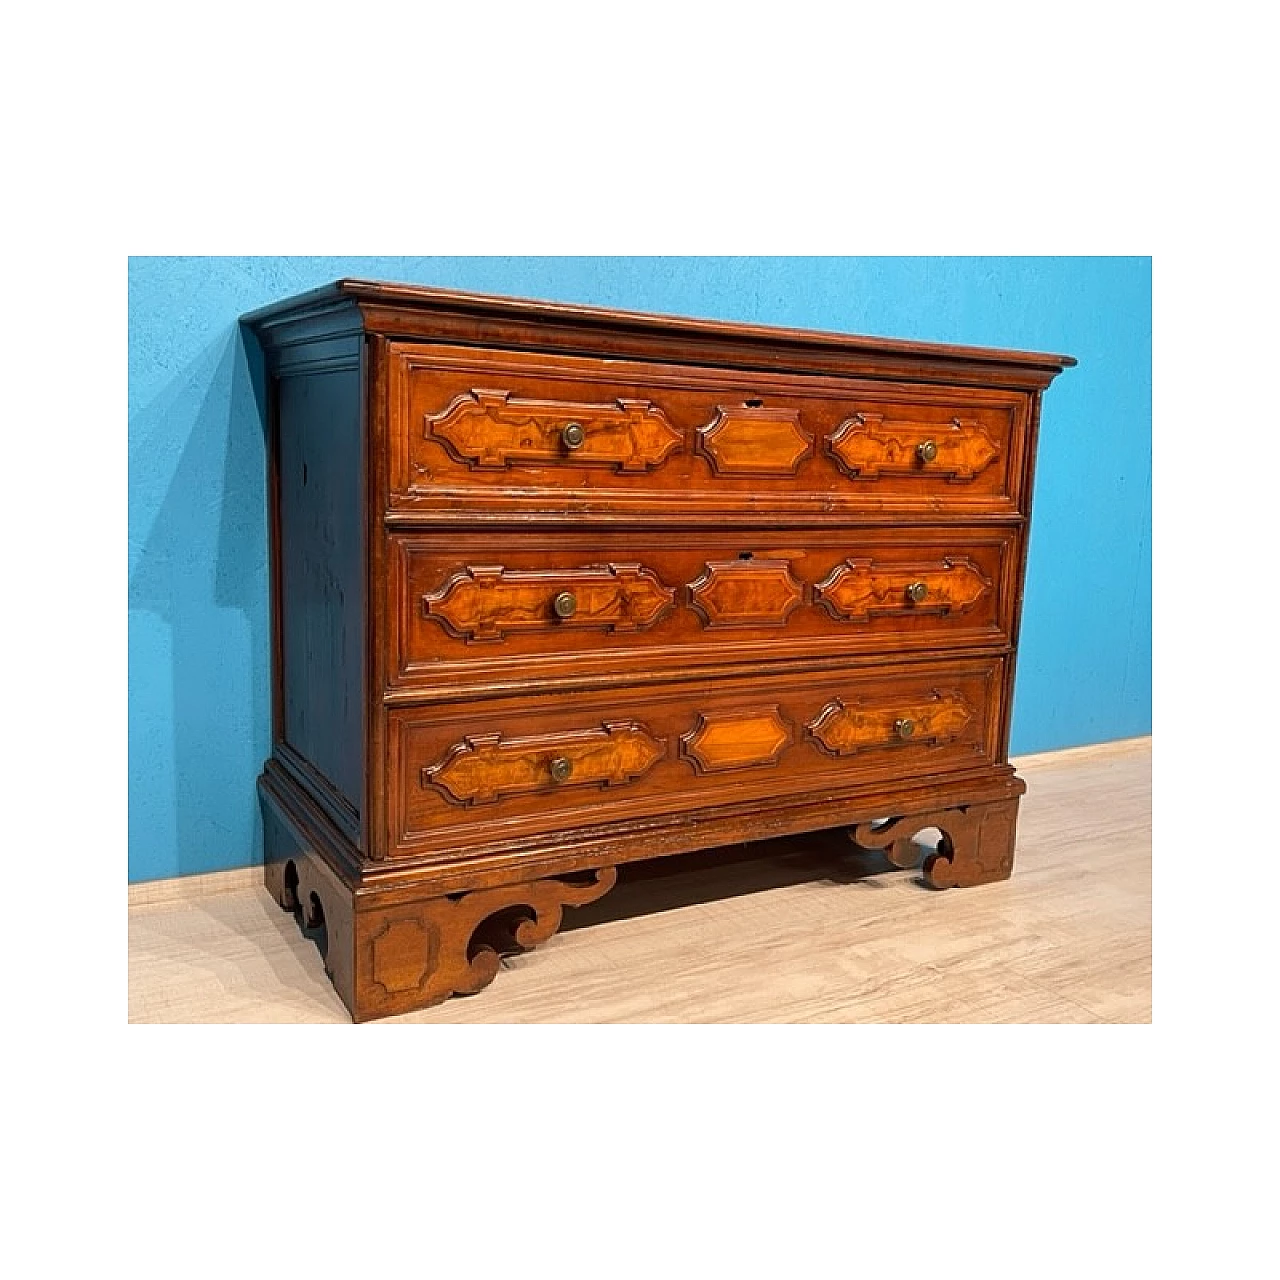 Lombardy chest of drawers in cherry wood, late 18th century 2